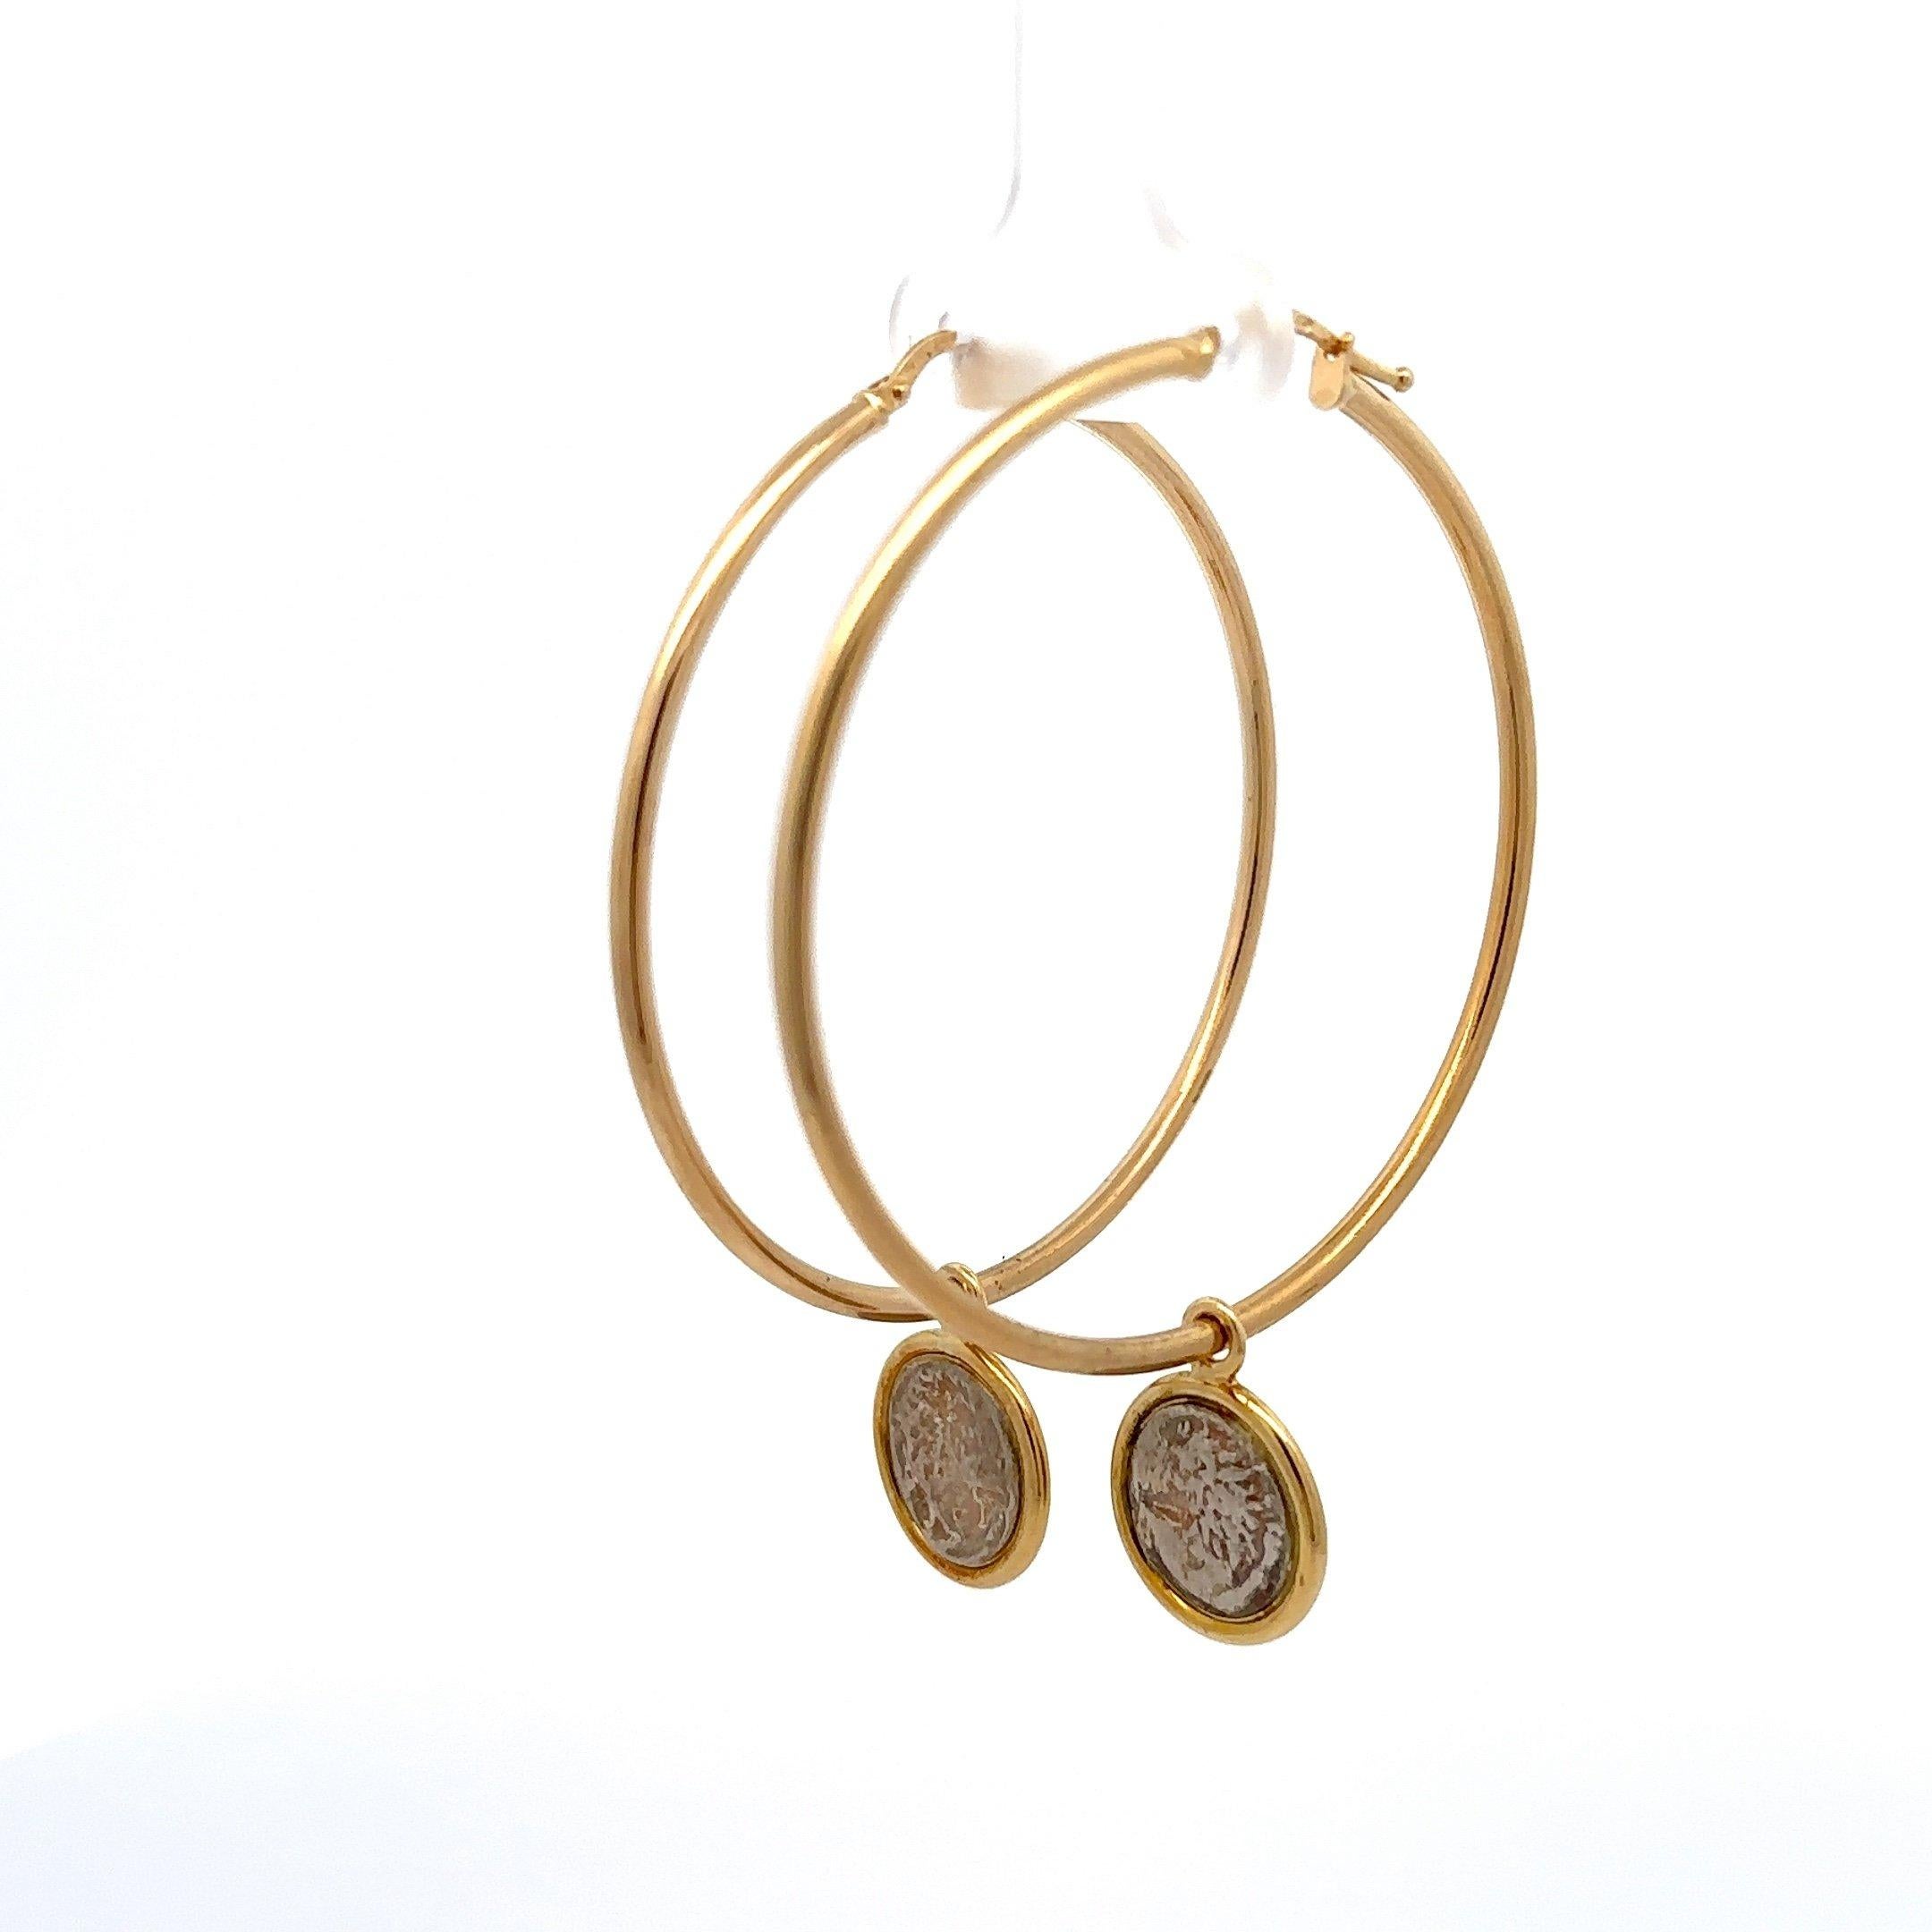 Dubini 18KT Yellow Gold Large Hoop Earrings with Silver Lion Coins 2